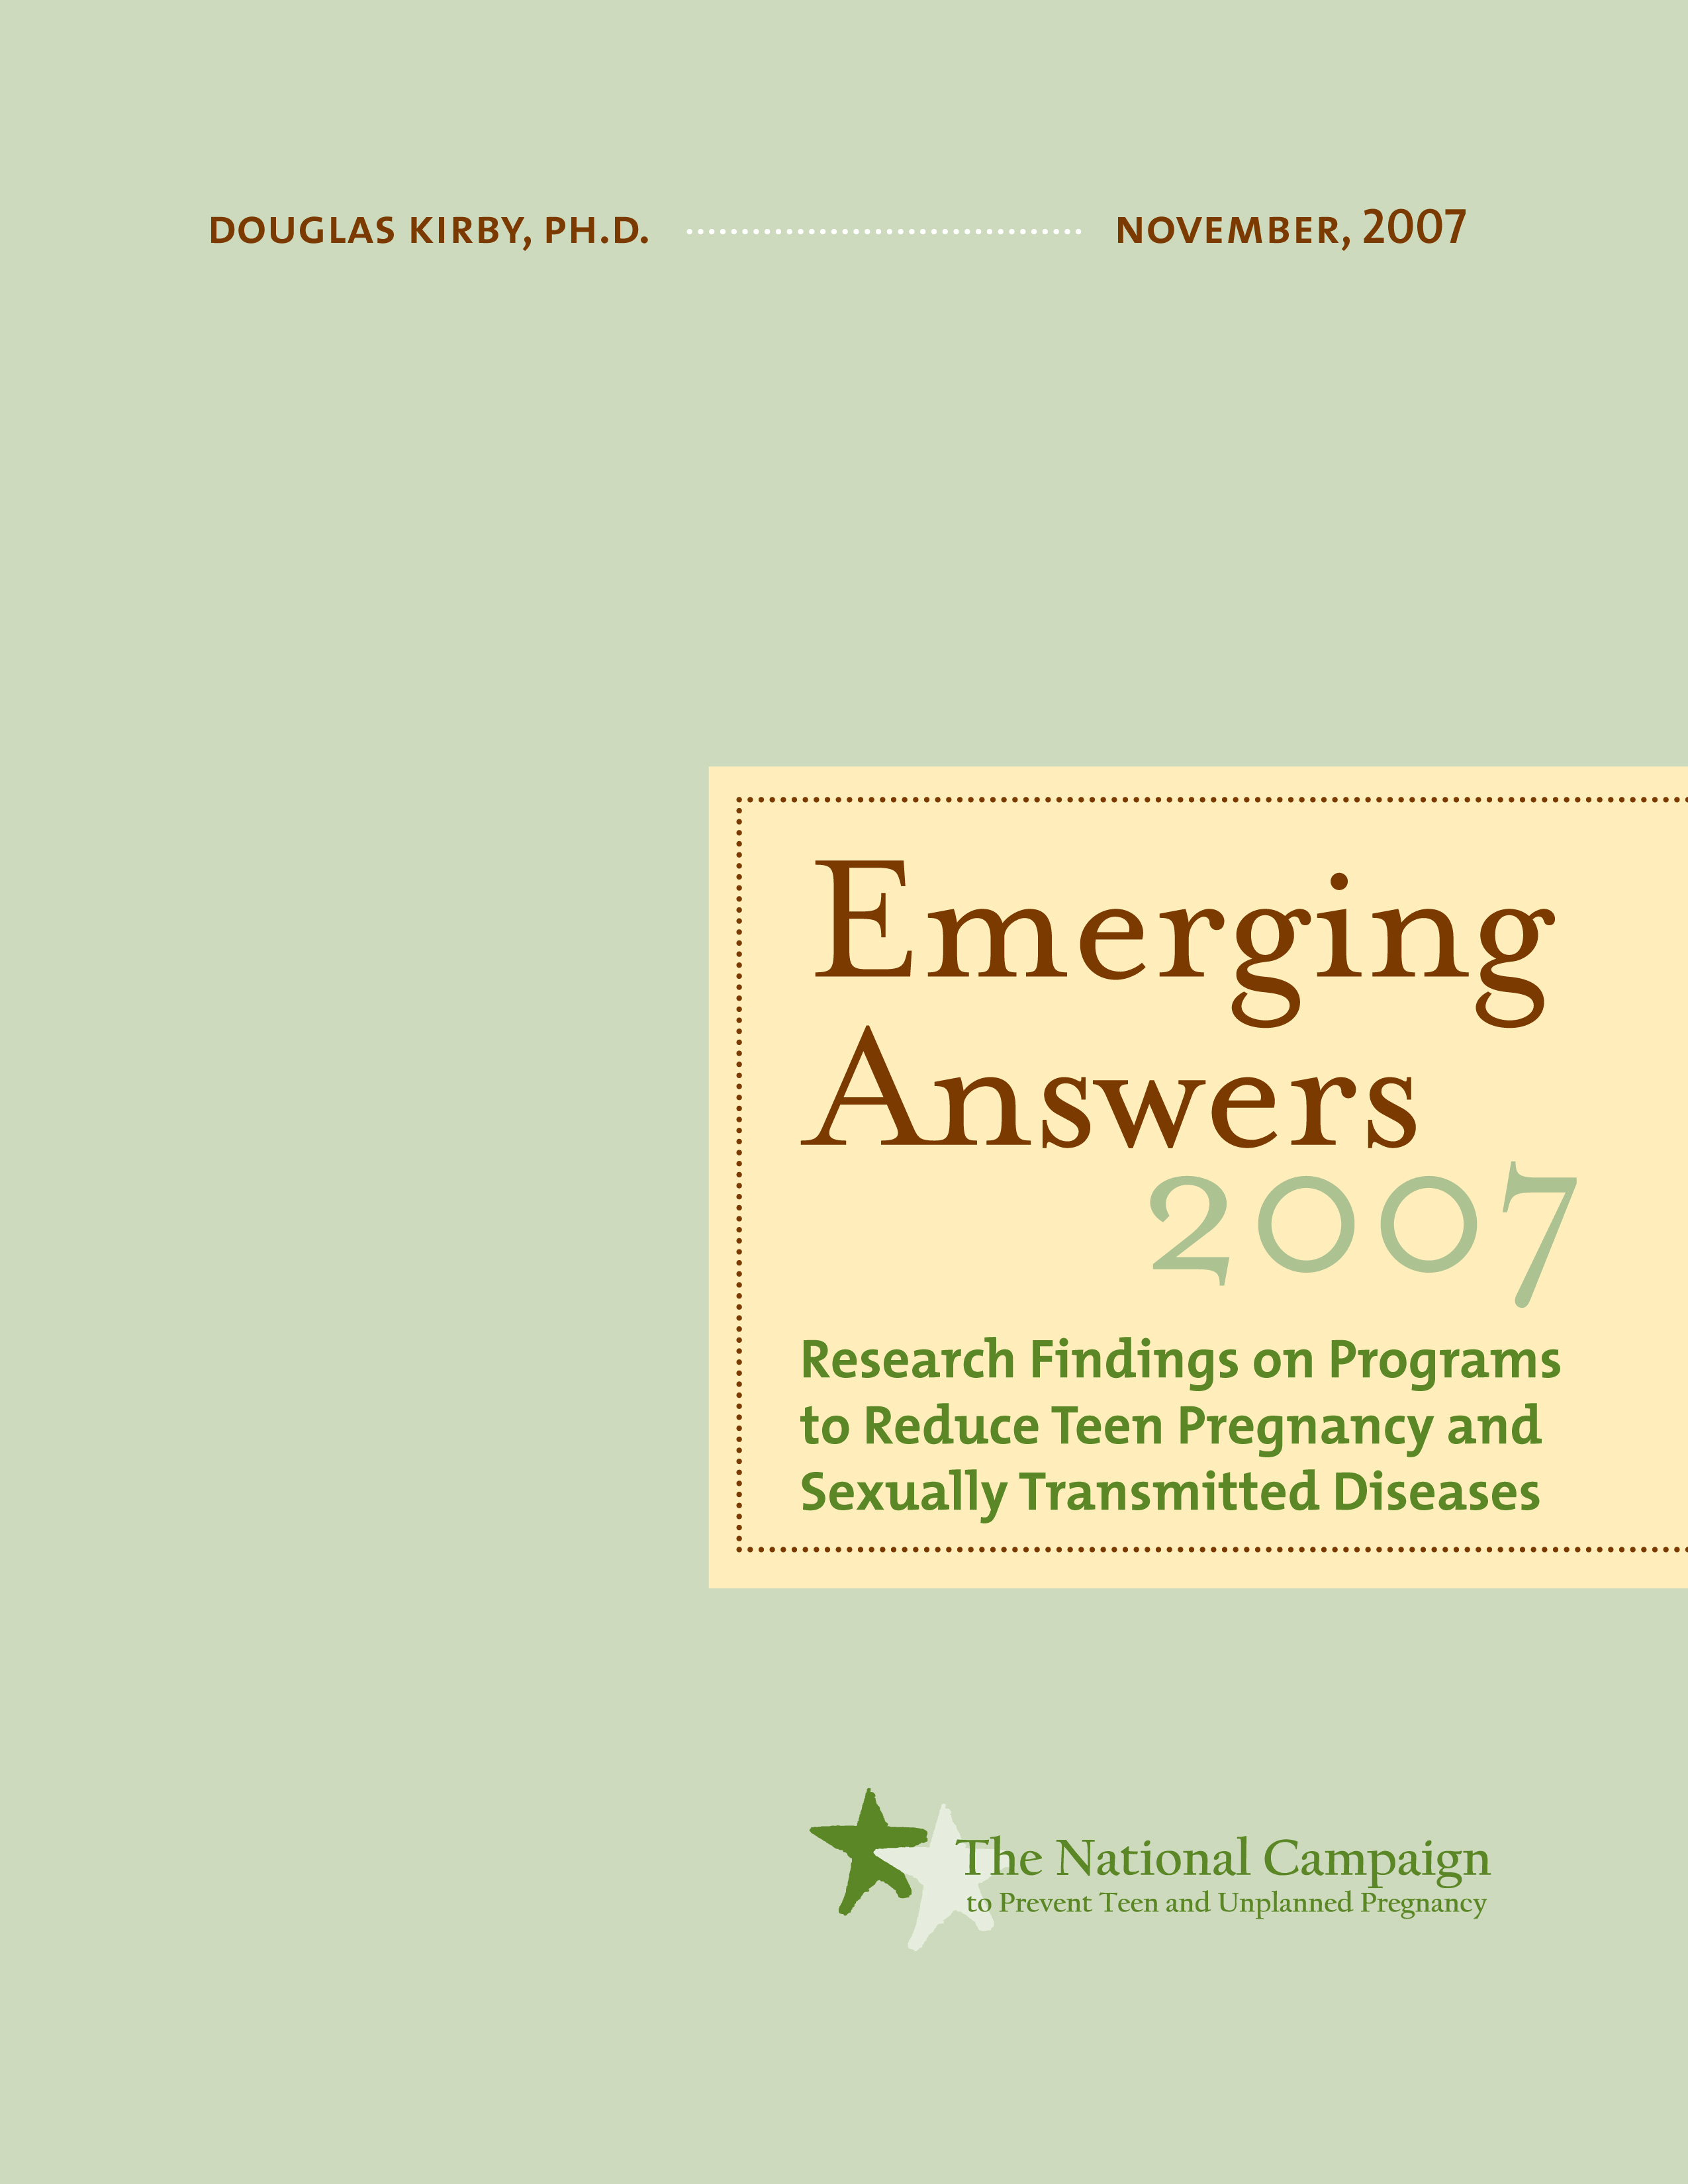 Emerging Answers 2007: New Research Findings on Programs to Reduce Teen Pregnancy—Full Report